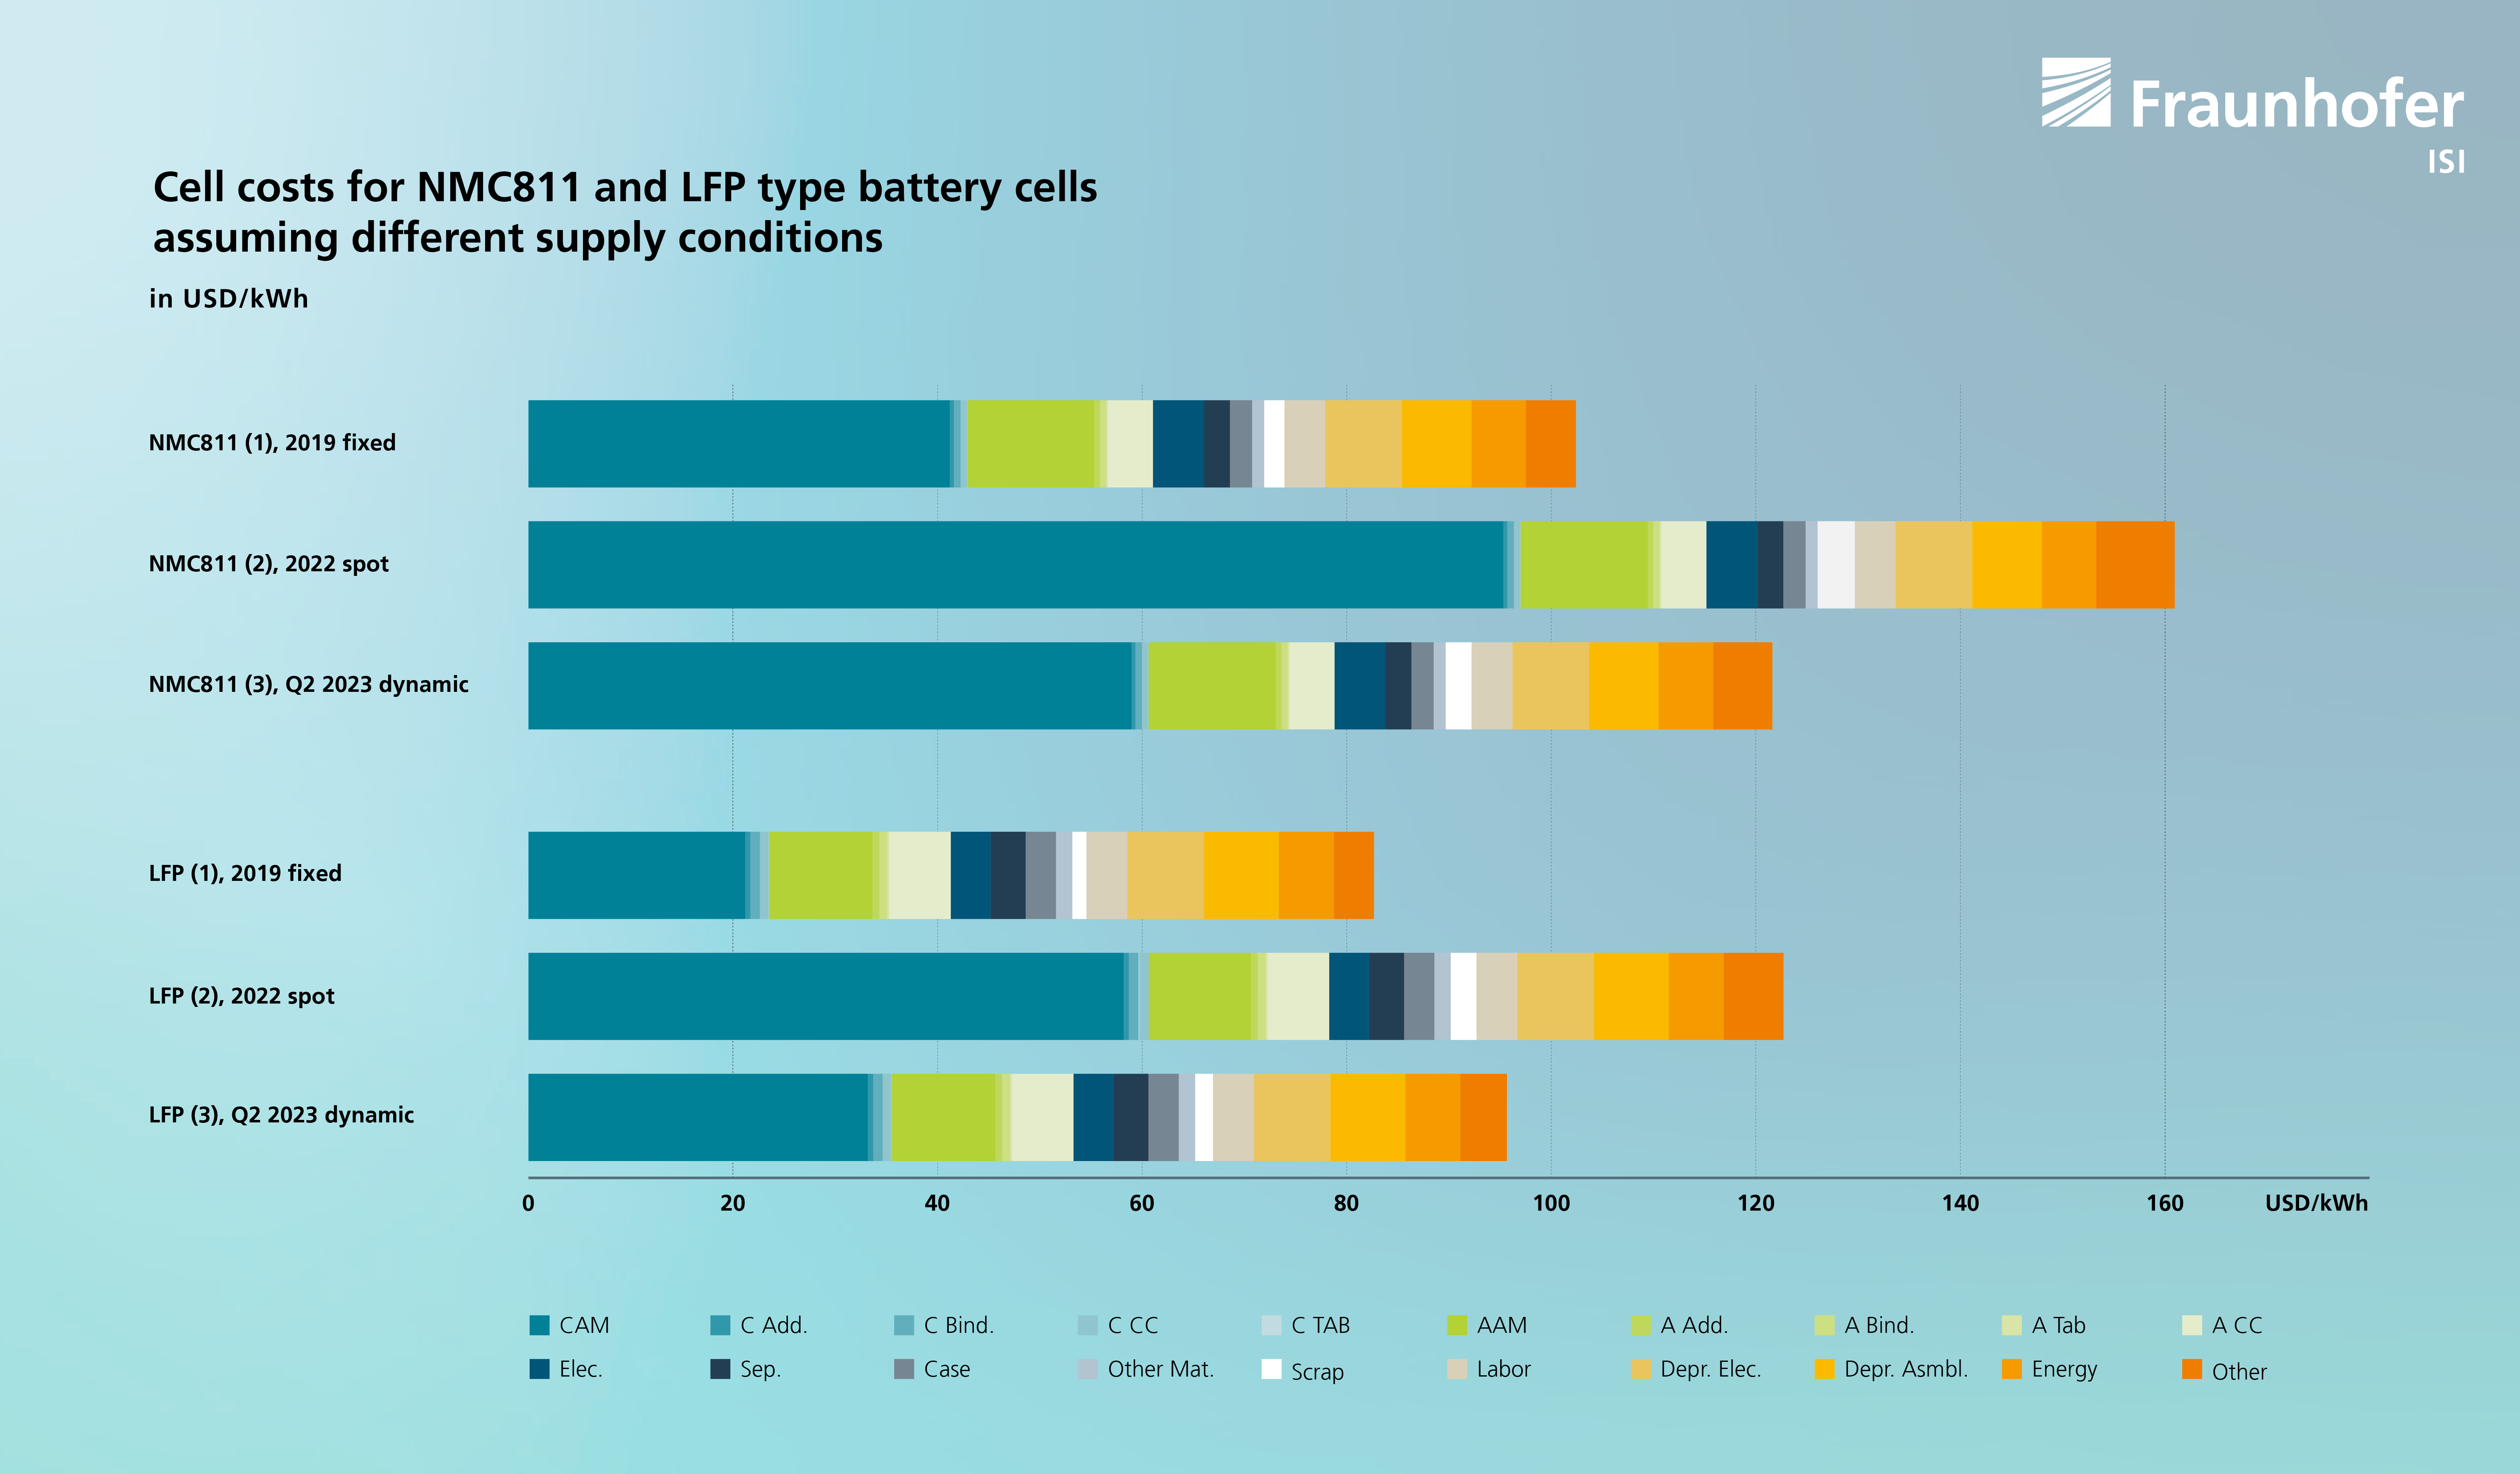 Cell costs for NMC811 and LFP type battery cells assuming different supply conditions.